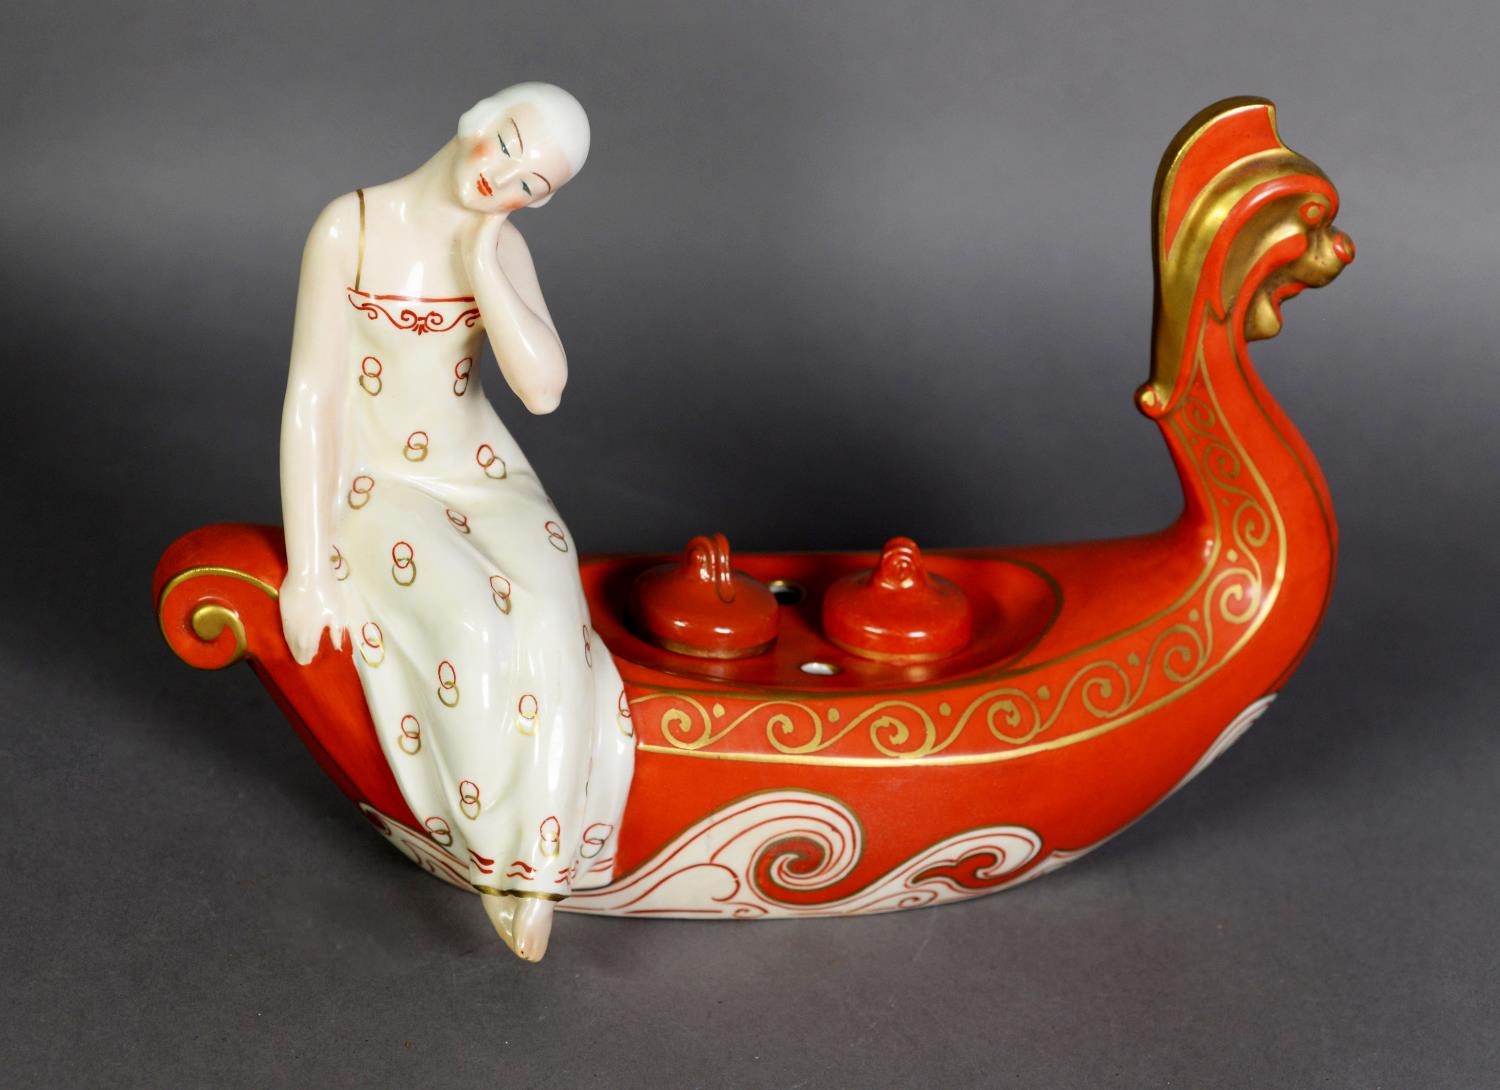 ROBJ, PARIS, ‘ALADIN LUXE’ PORCELAIN ART DECO FIGURAL INK STAND, painted in burnt orange and gilt